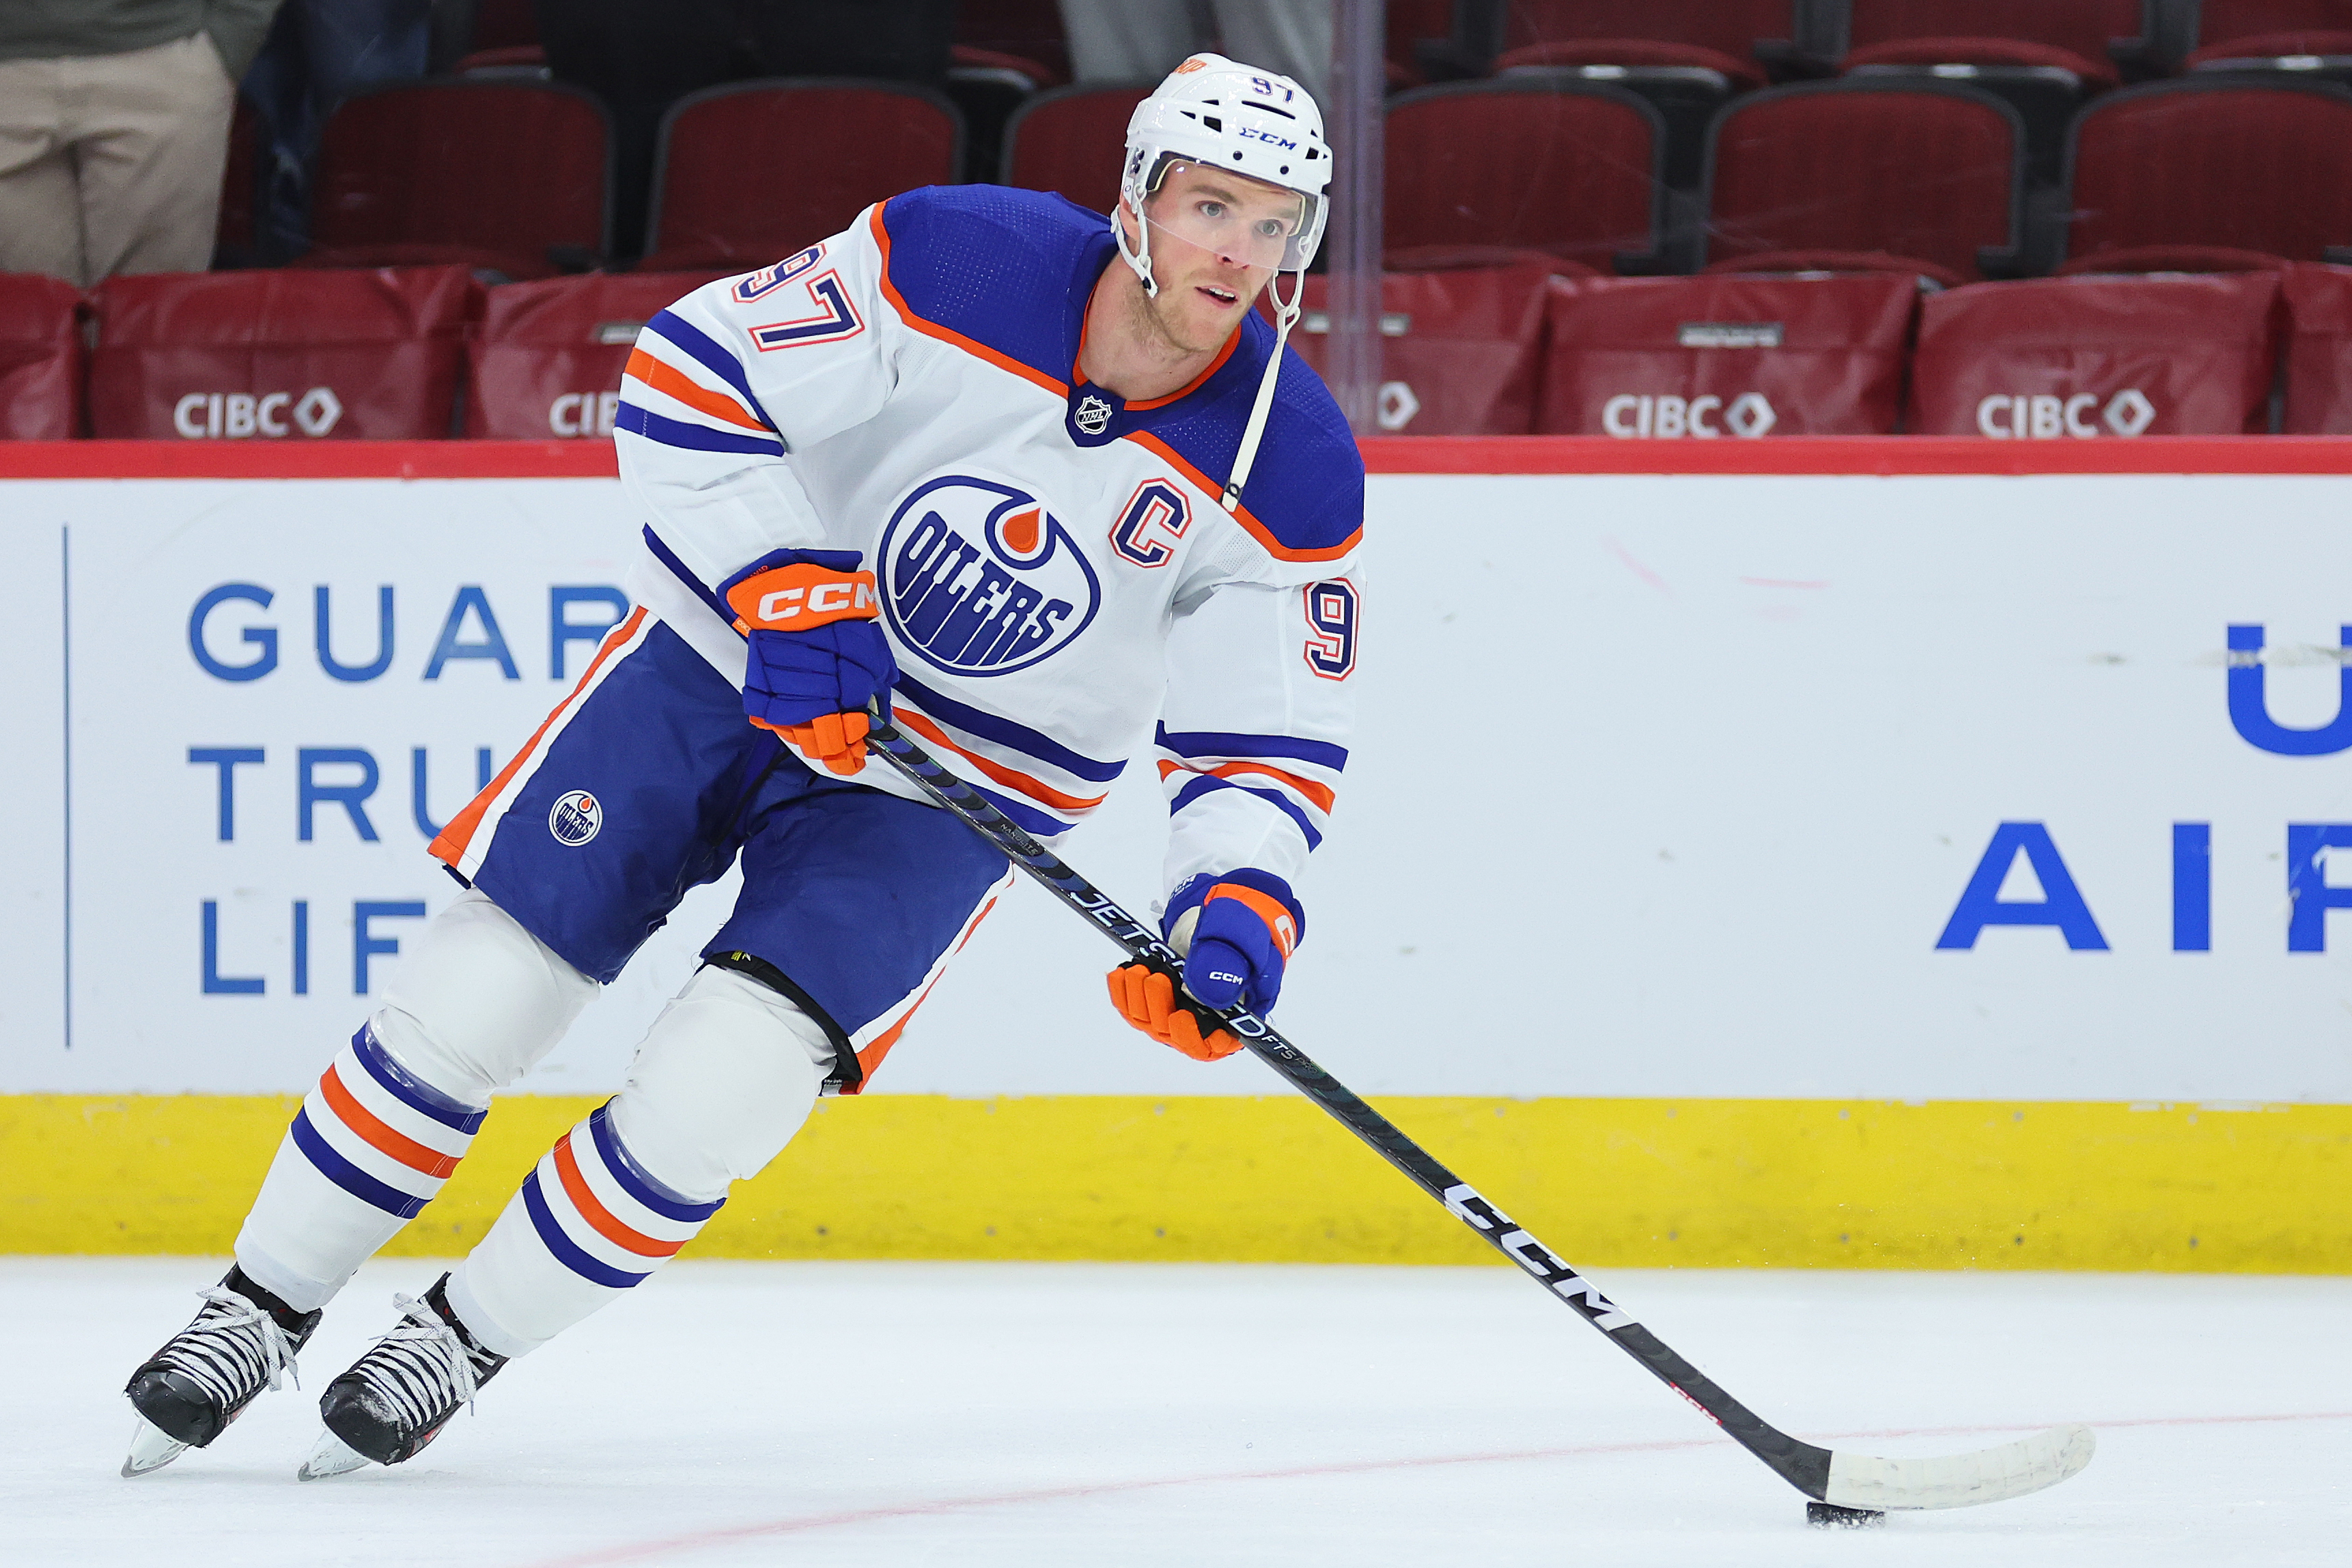 Oilers star Connor McDavid leads the NHLs latest Golden Era of young talent